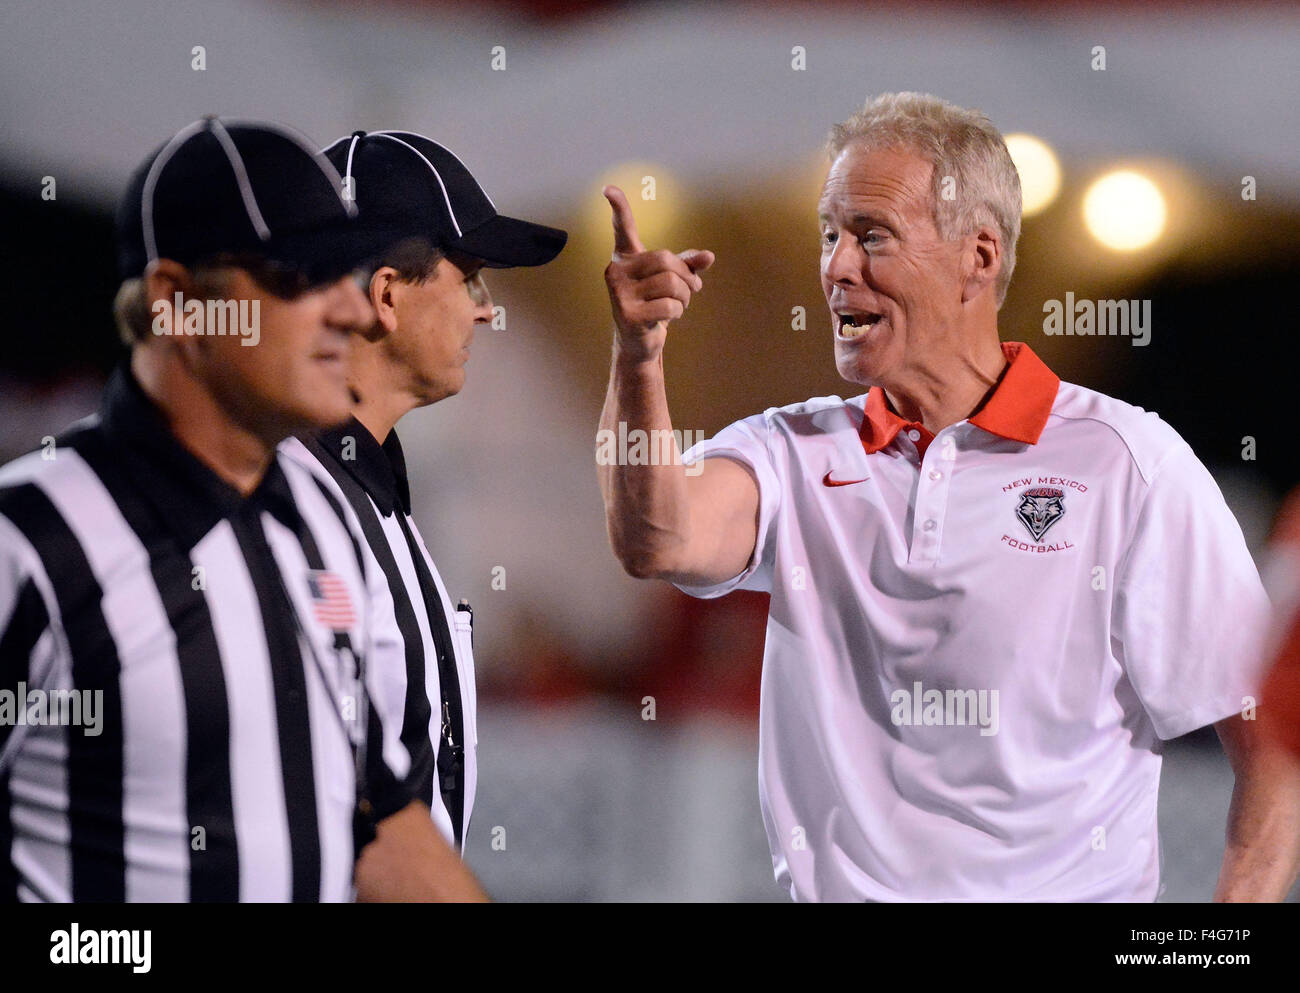 Albuquerque, NM, USA. 17th Oct, 2015. UNM's coach Bob Davie has a few words for the referee about the play that is showing on the video board in their game against Hawaii. Saturday, Oct. 17, 2015. © Jim Thompson/Albuquerque Journal/ZUMA Wire/Alamy Live News Stock Photo